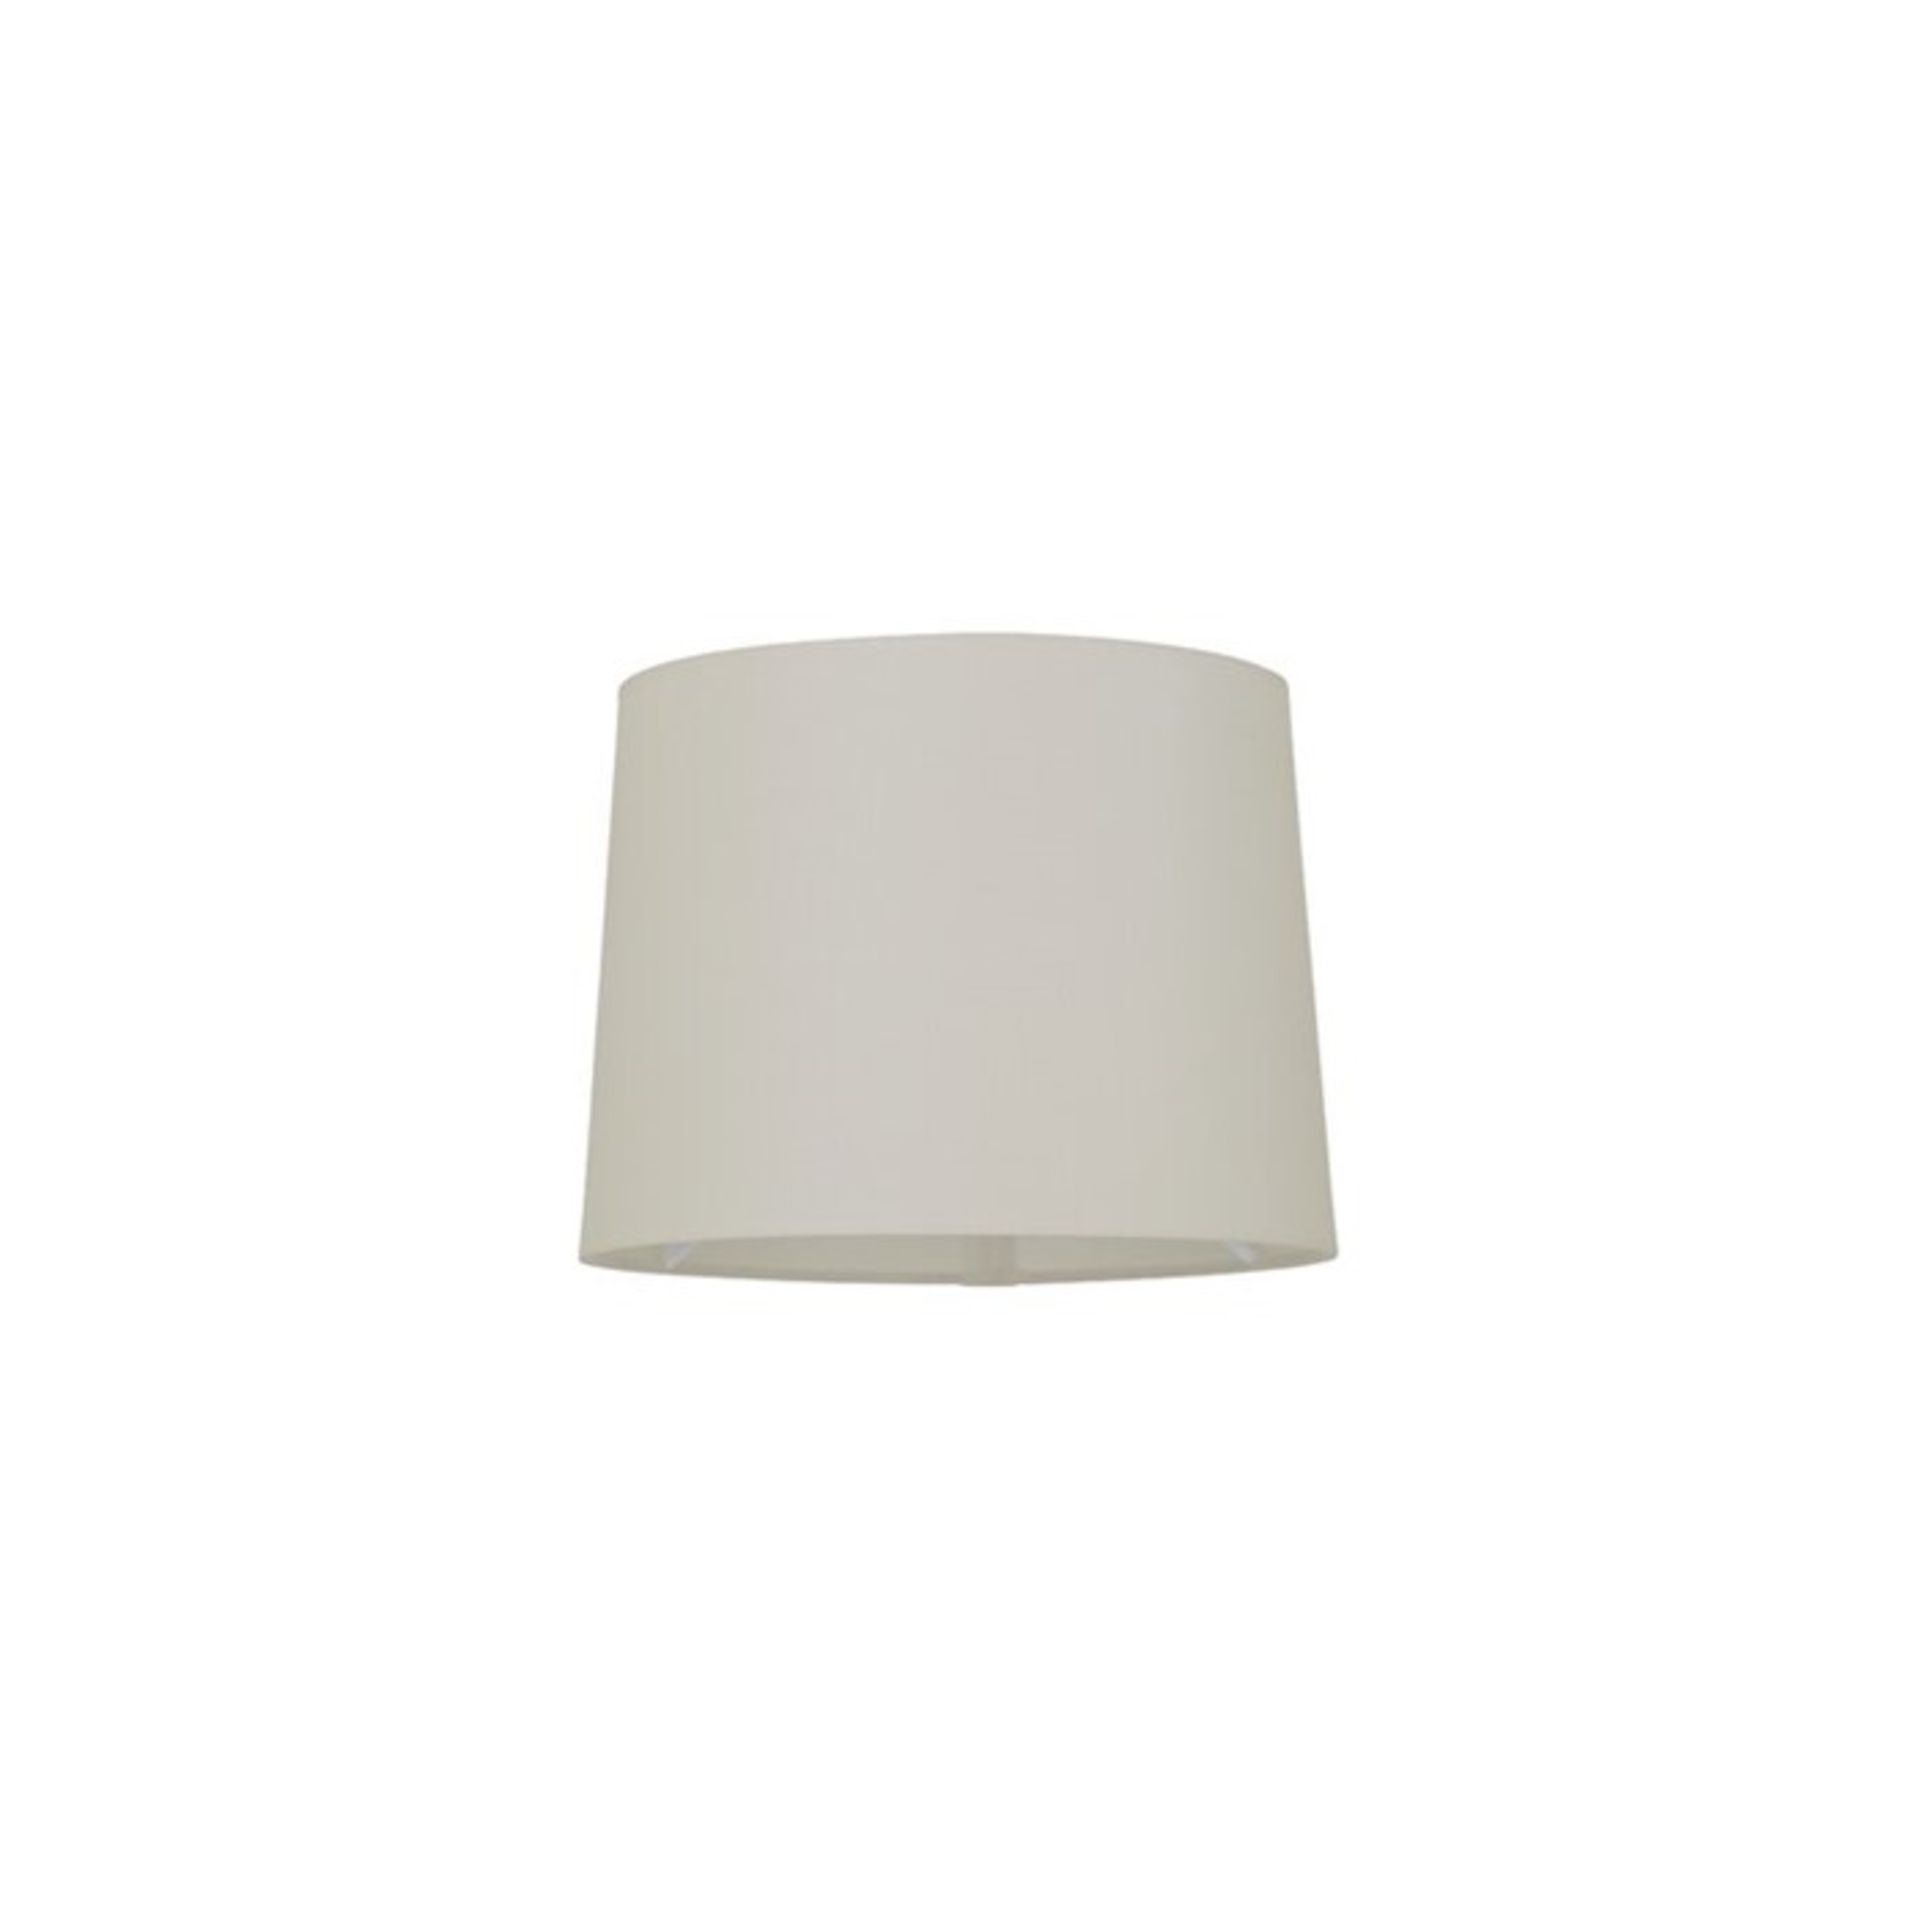 17 Stories, 20cm Cotton Bell Lamp Shade|GREY| - RRP £18.41 (UEL10509 - 17873/23) 6D